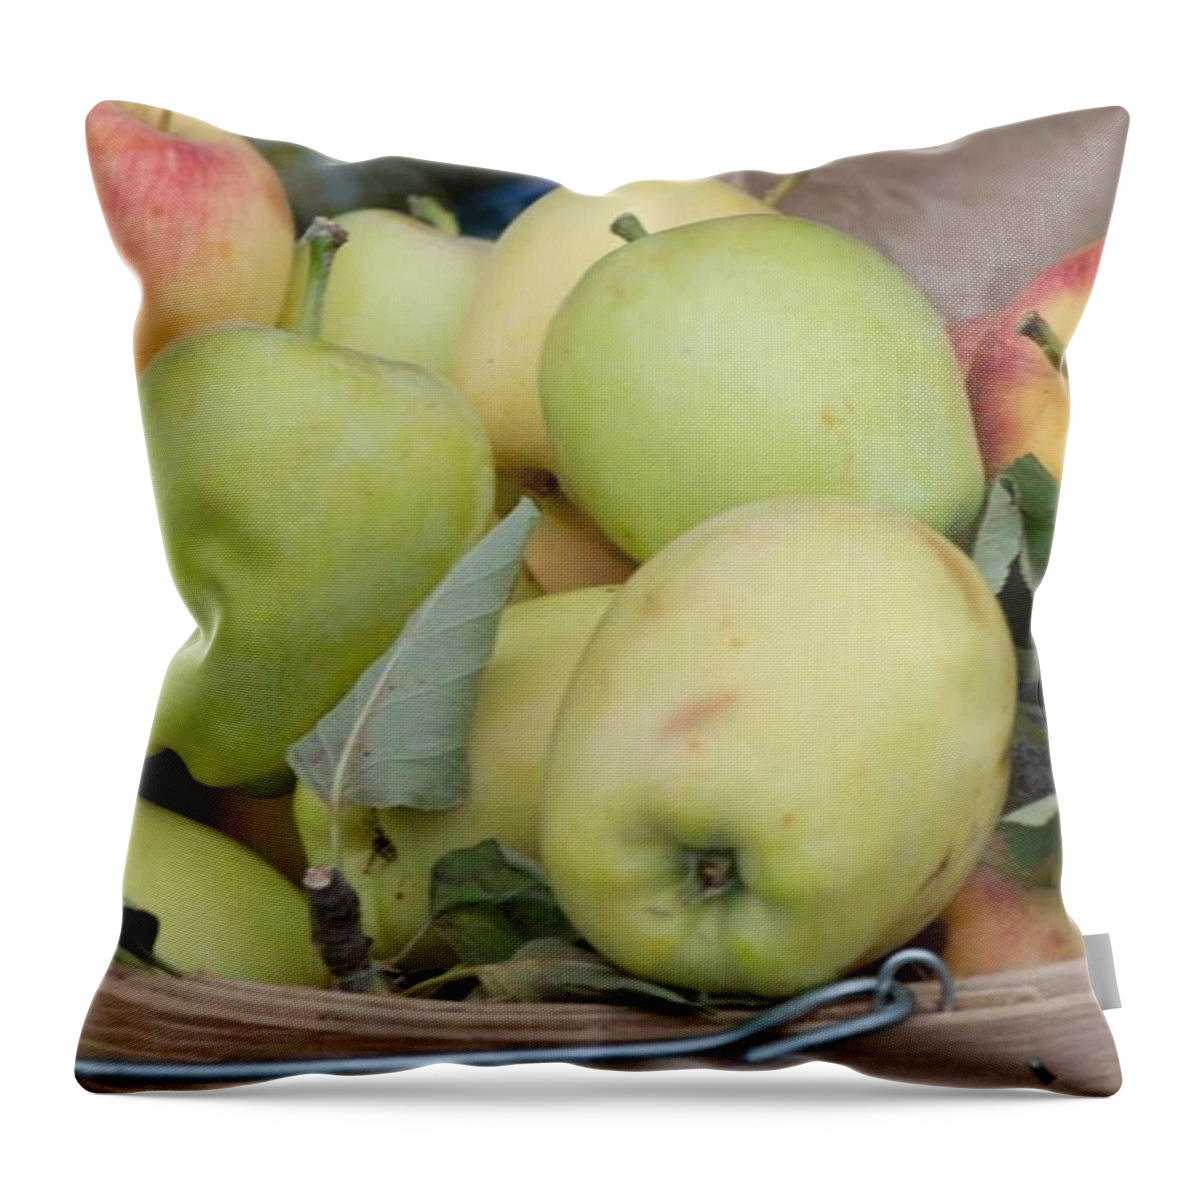 Vendor Throw Pillow featuring the photograph Locally Grown Apples by Michael Moriarty